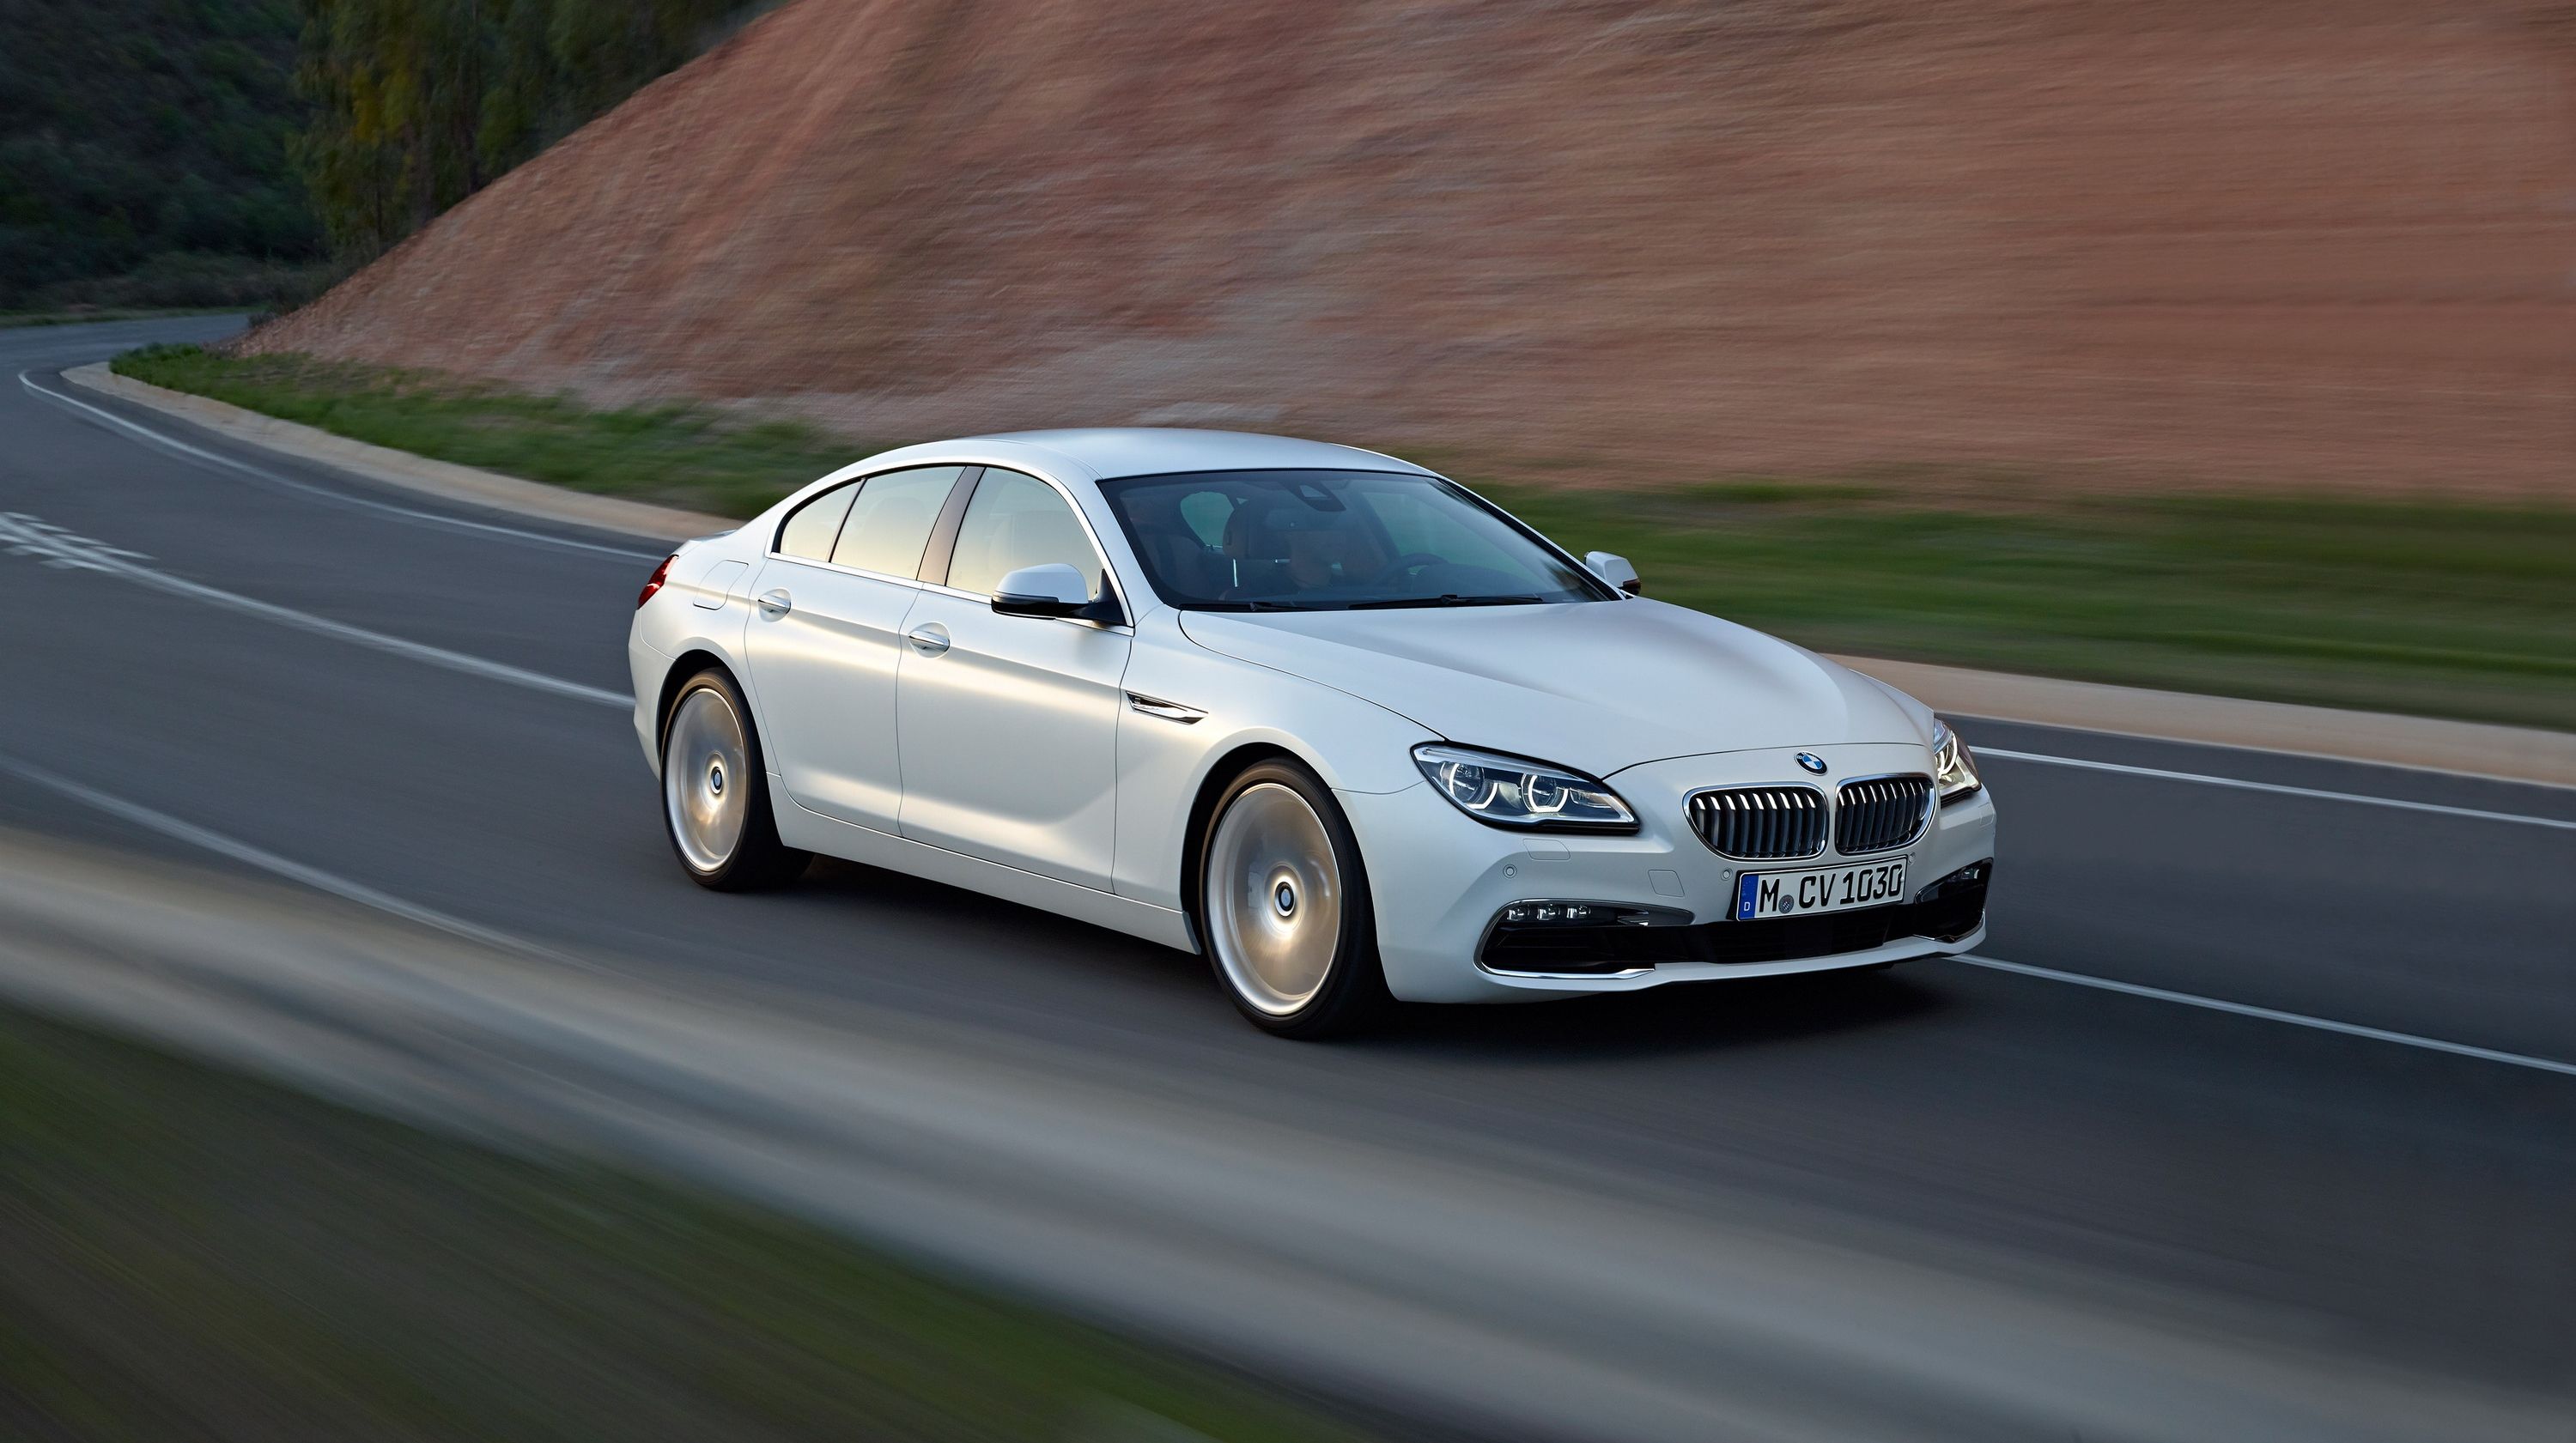  Now that we've seen other revised 6 Series model, we get a look at the Grand Coupe model. 